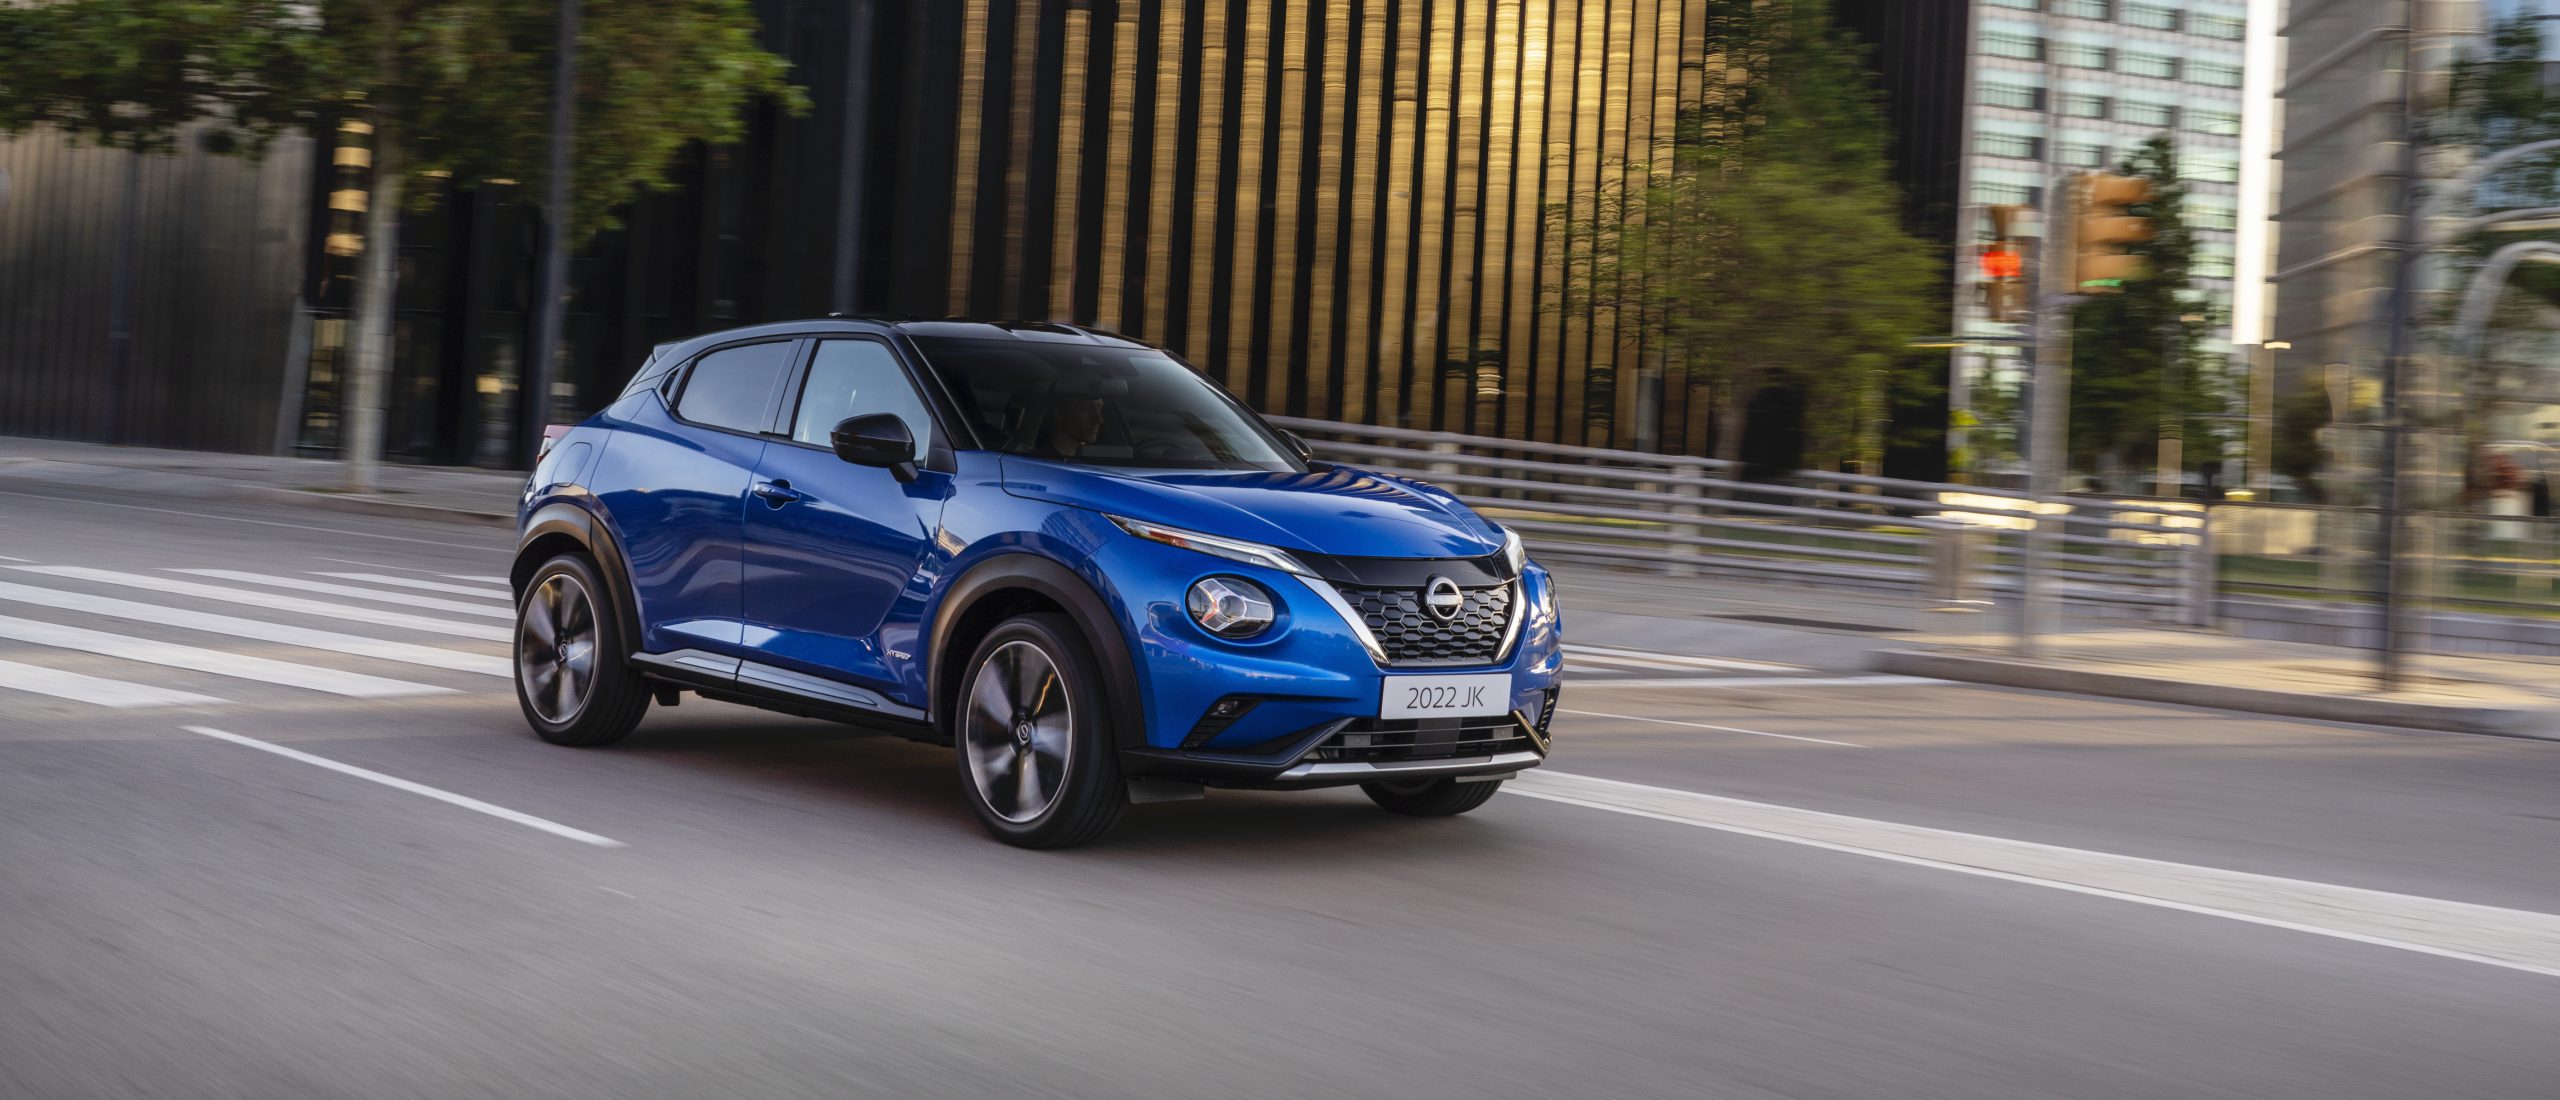 New Nissan Juke ‘Advanced’ Hybrid pricing announced and Now Open for